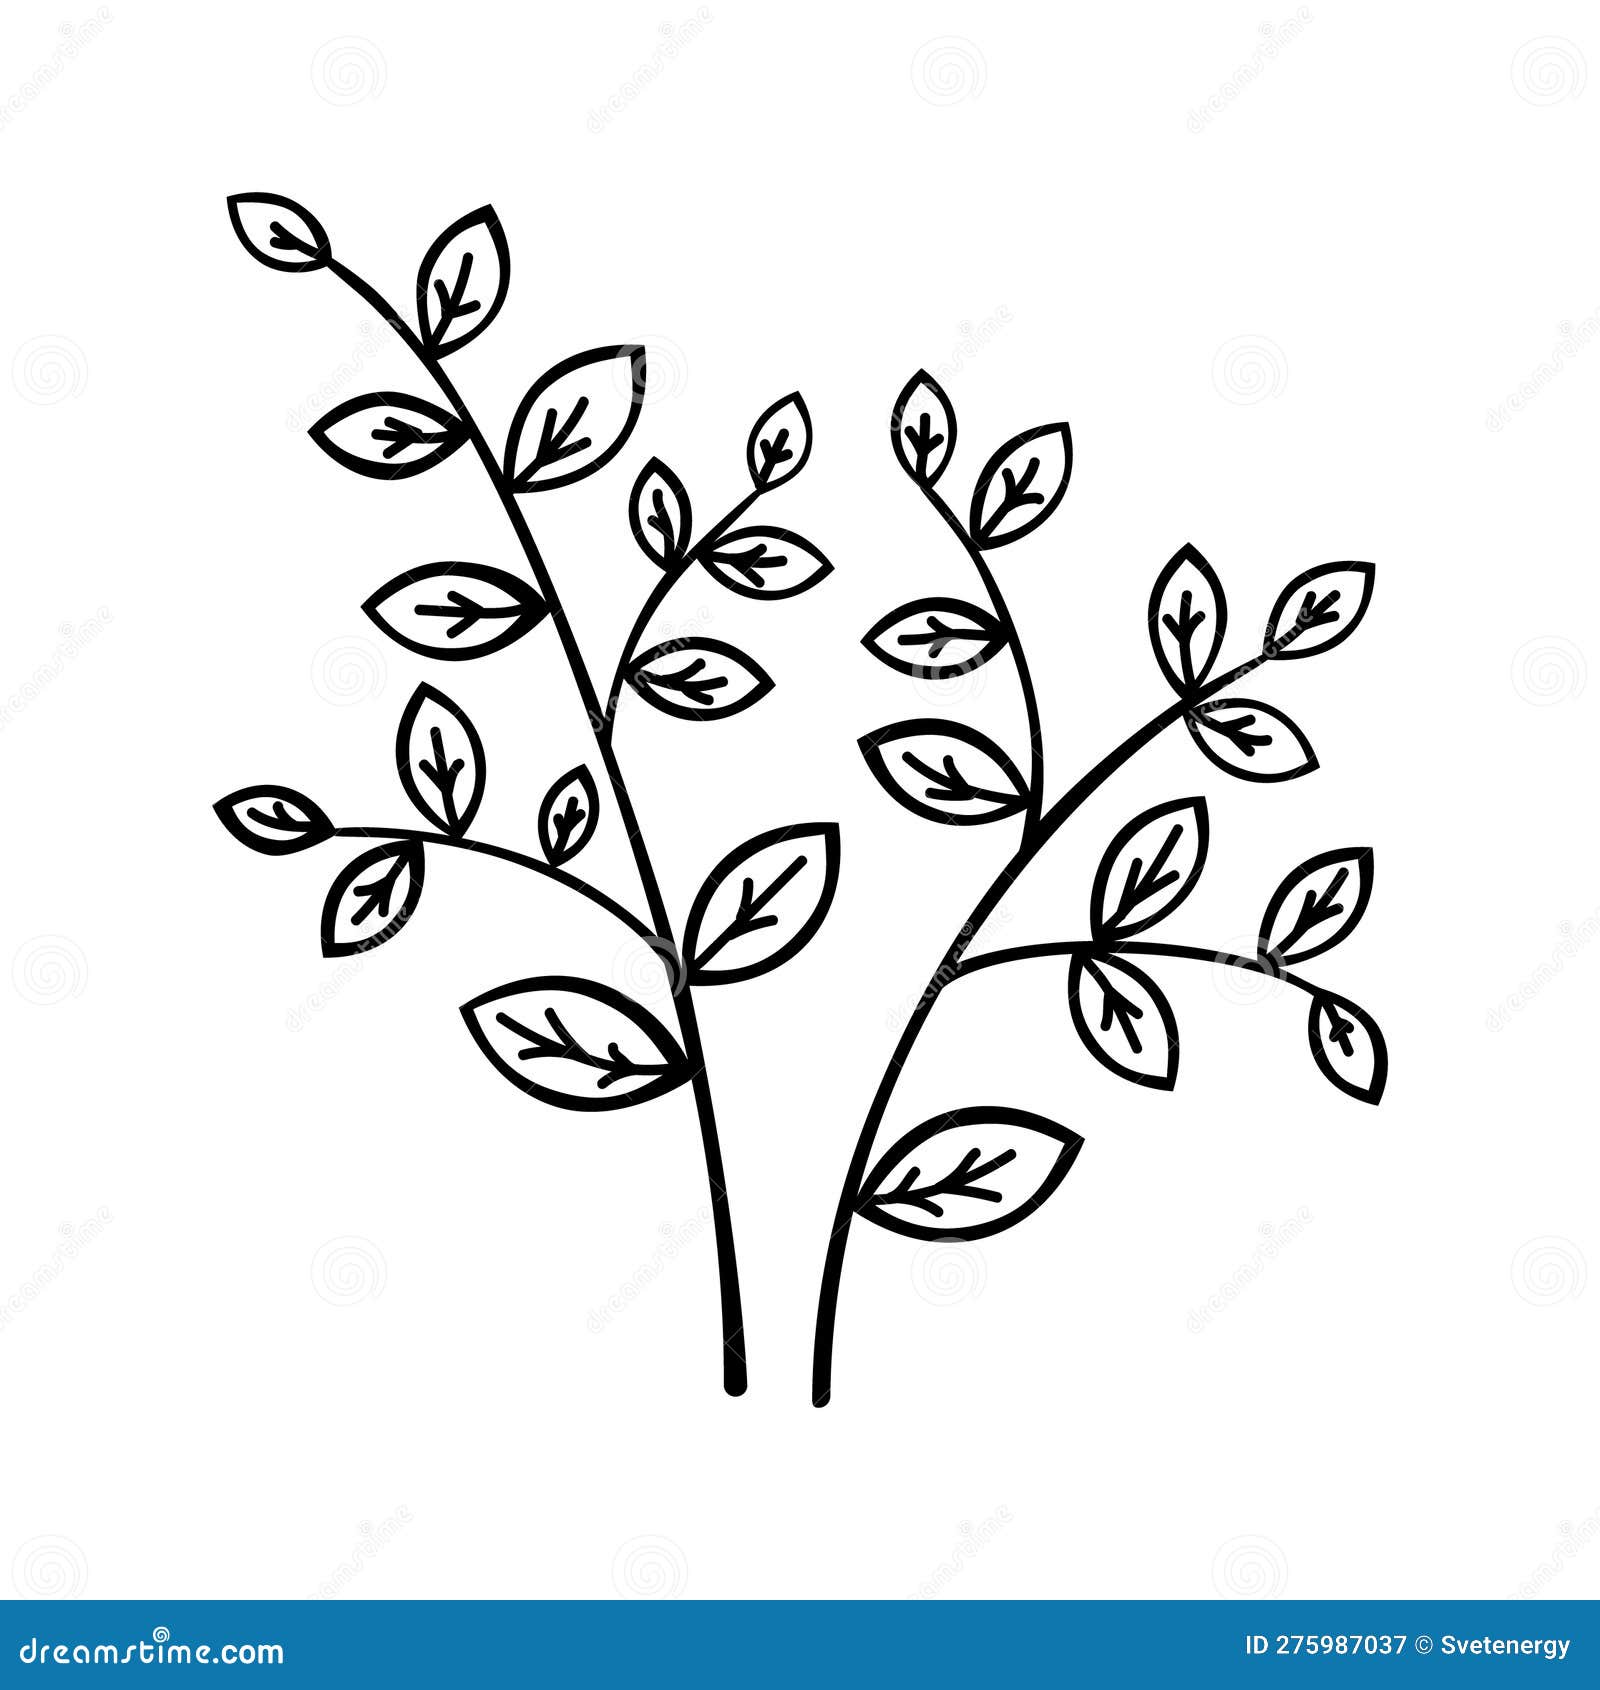 Hand Drawn Flower and Branches Doodle. Vector Illustration Stock Vector ...